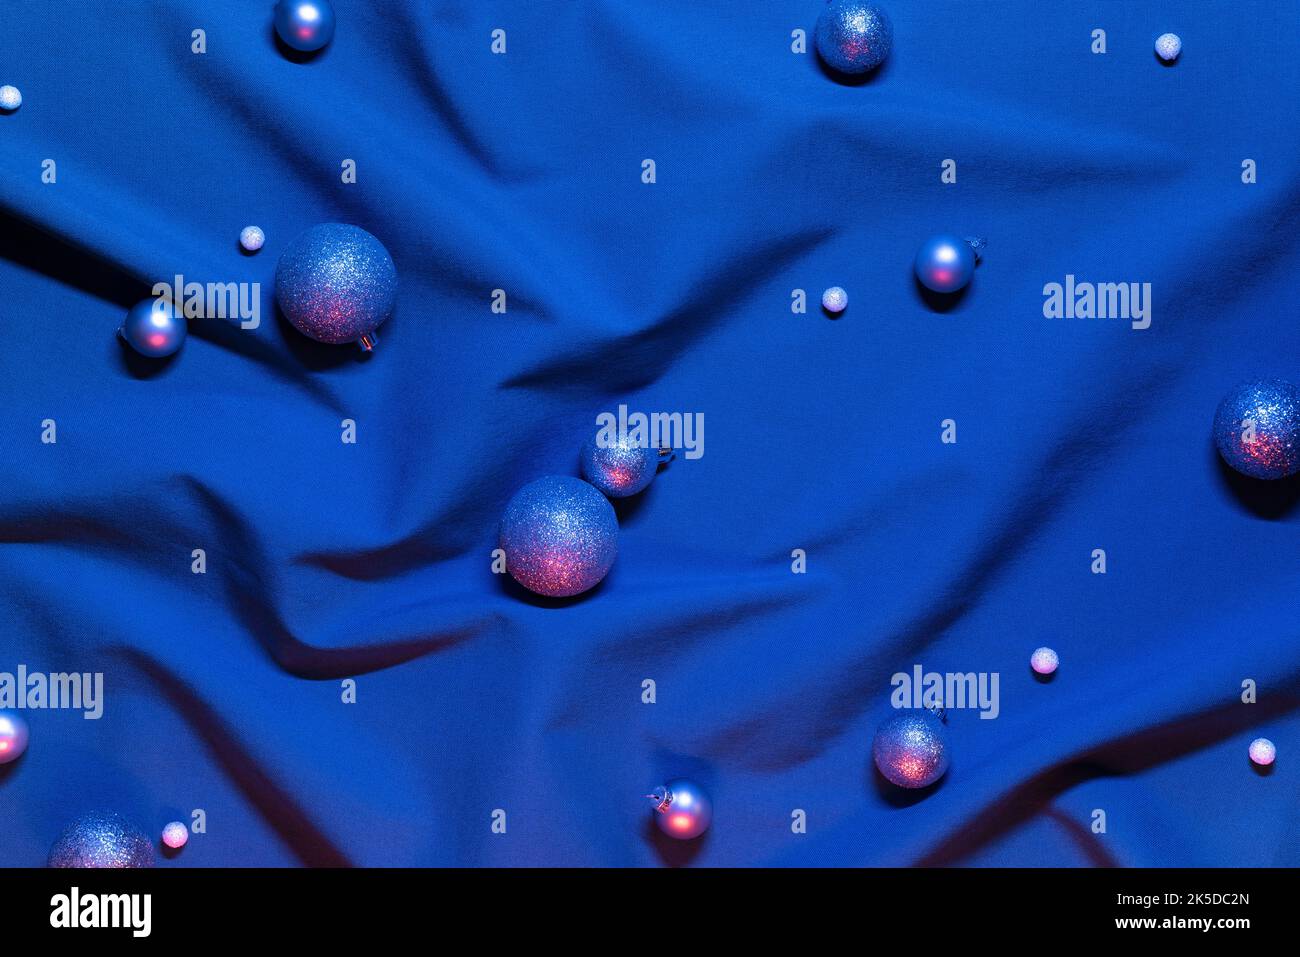 Blue Christmas background with glistening glass balls in neon light Stock Photo